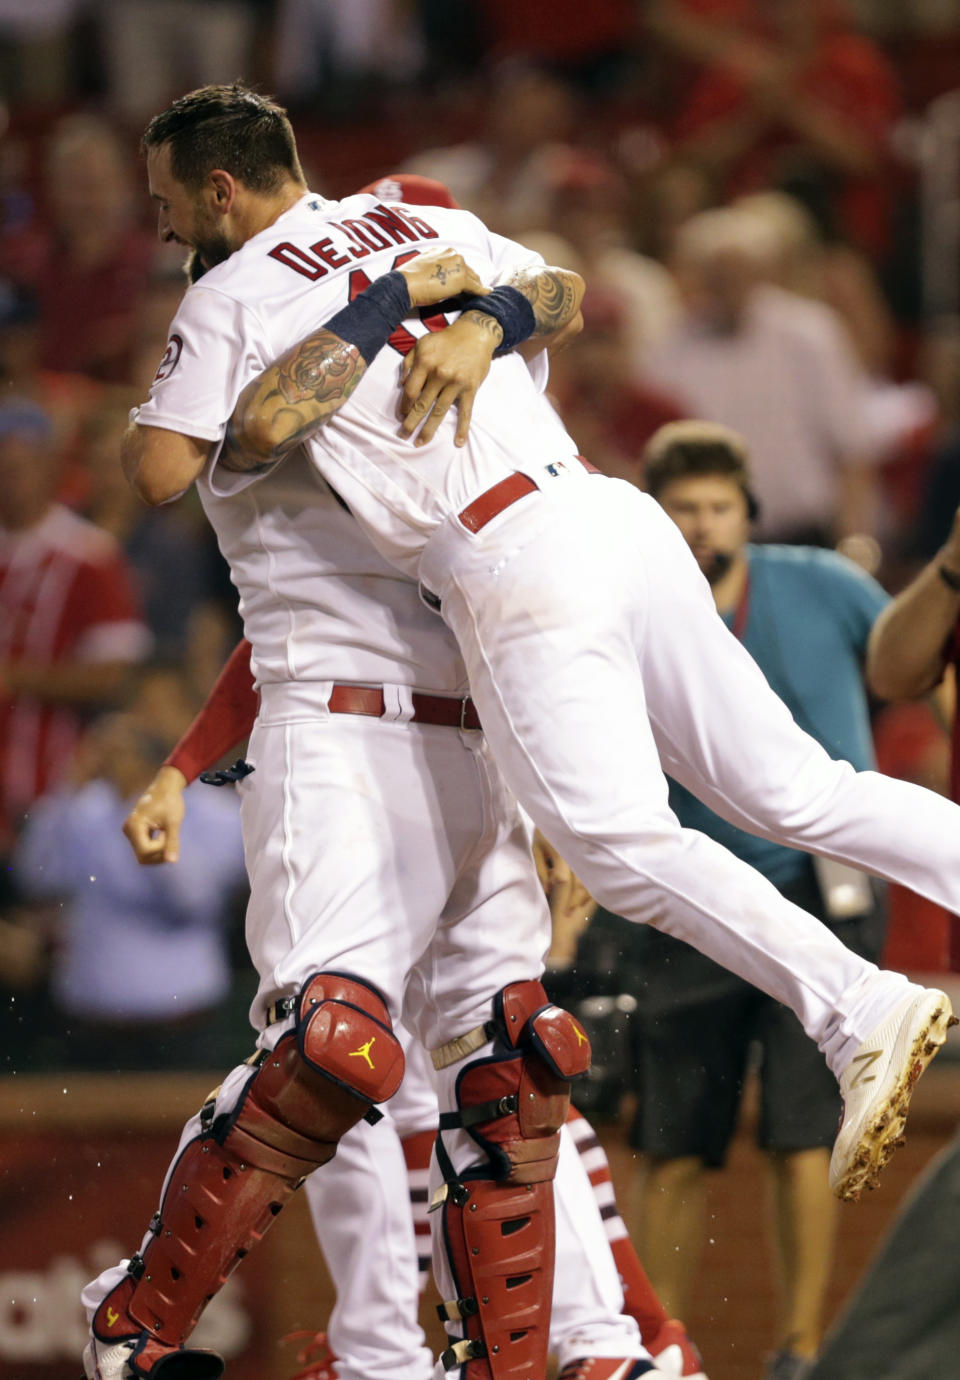 St. Louis Cardinals' Yadier Molina lifts St. Louis Cardinals' Paul DeJong in celebration after he hit a walk-off home run in the ninth inning of a baseball game, Monday, Aug. 13, 2018, in St. Louis. The Cardinals beat the Nationals 7-6. (AP Photo/Tom Gannam)